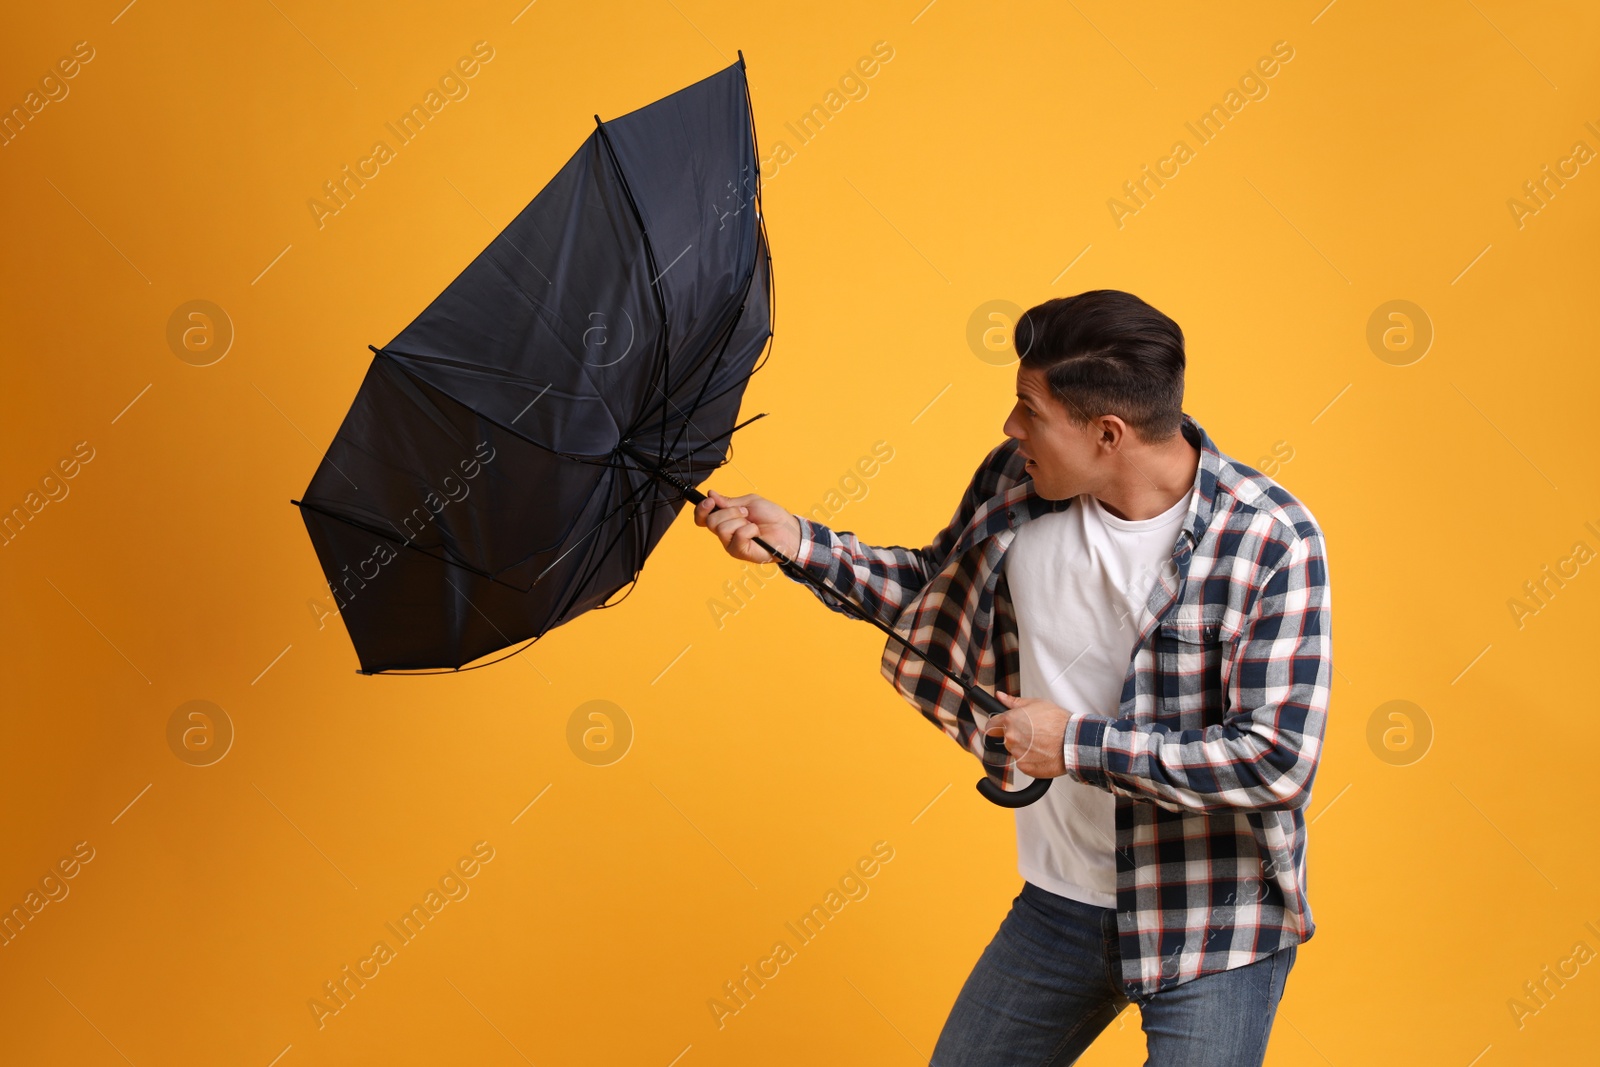 Photo of Man with umbrella caught in gust of wind on yellow background